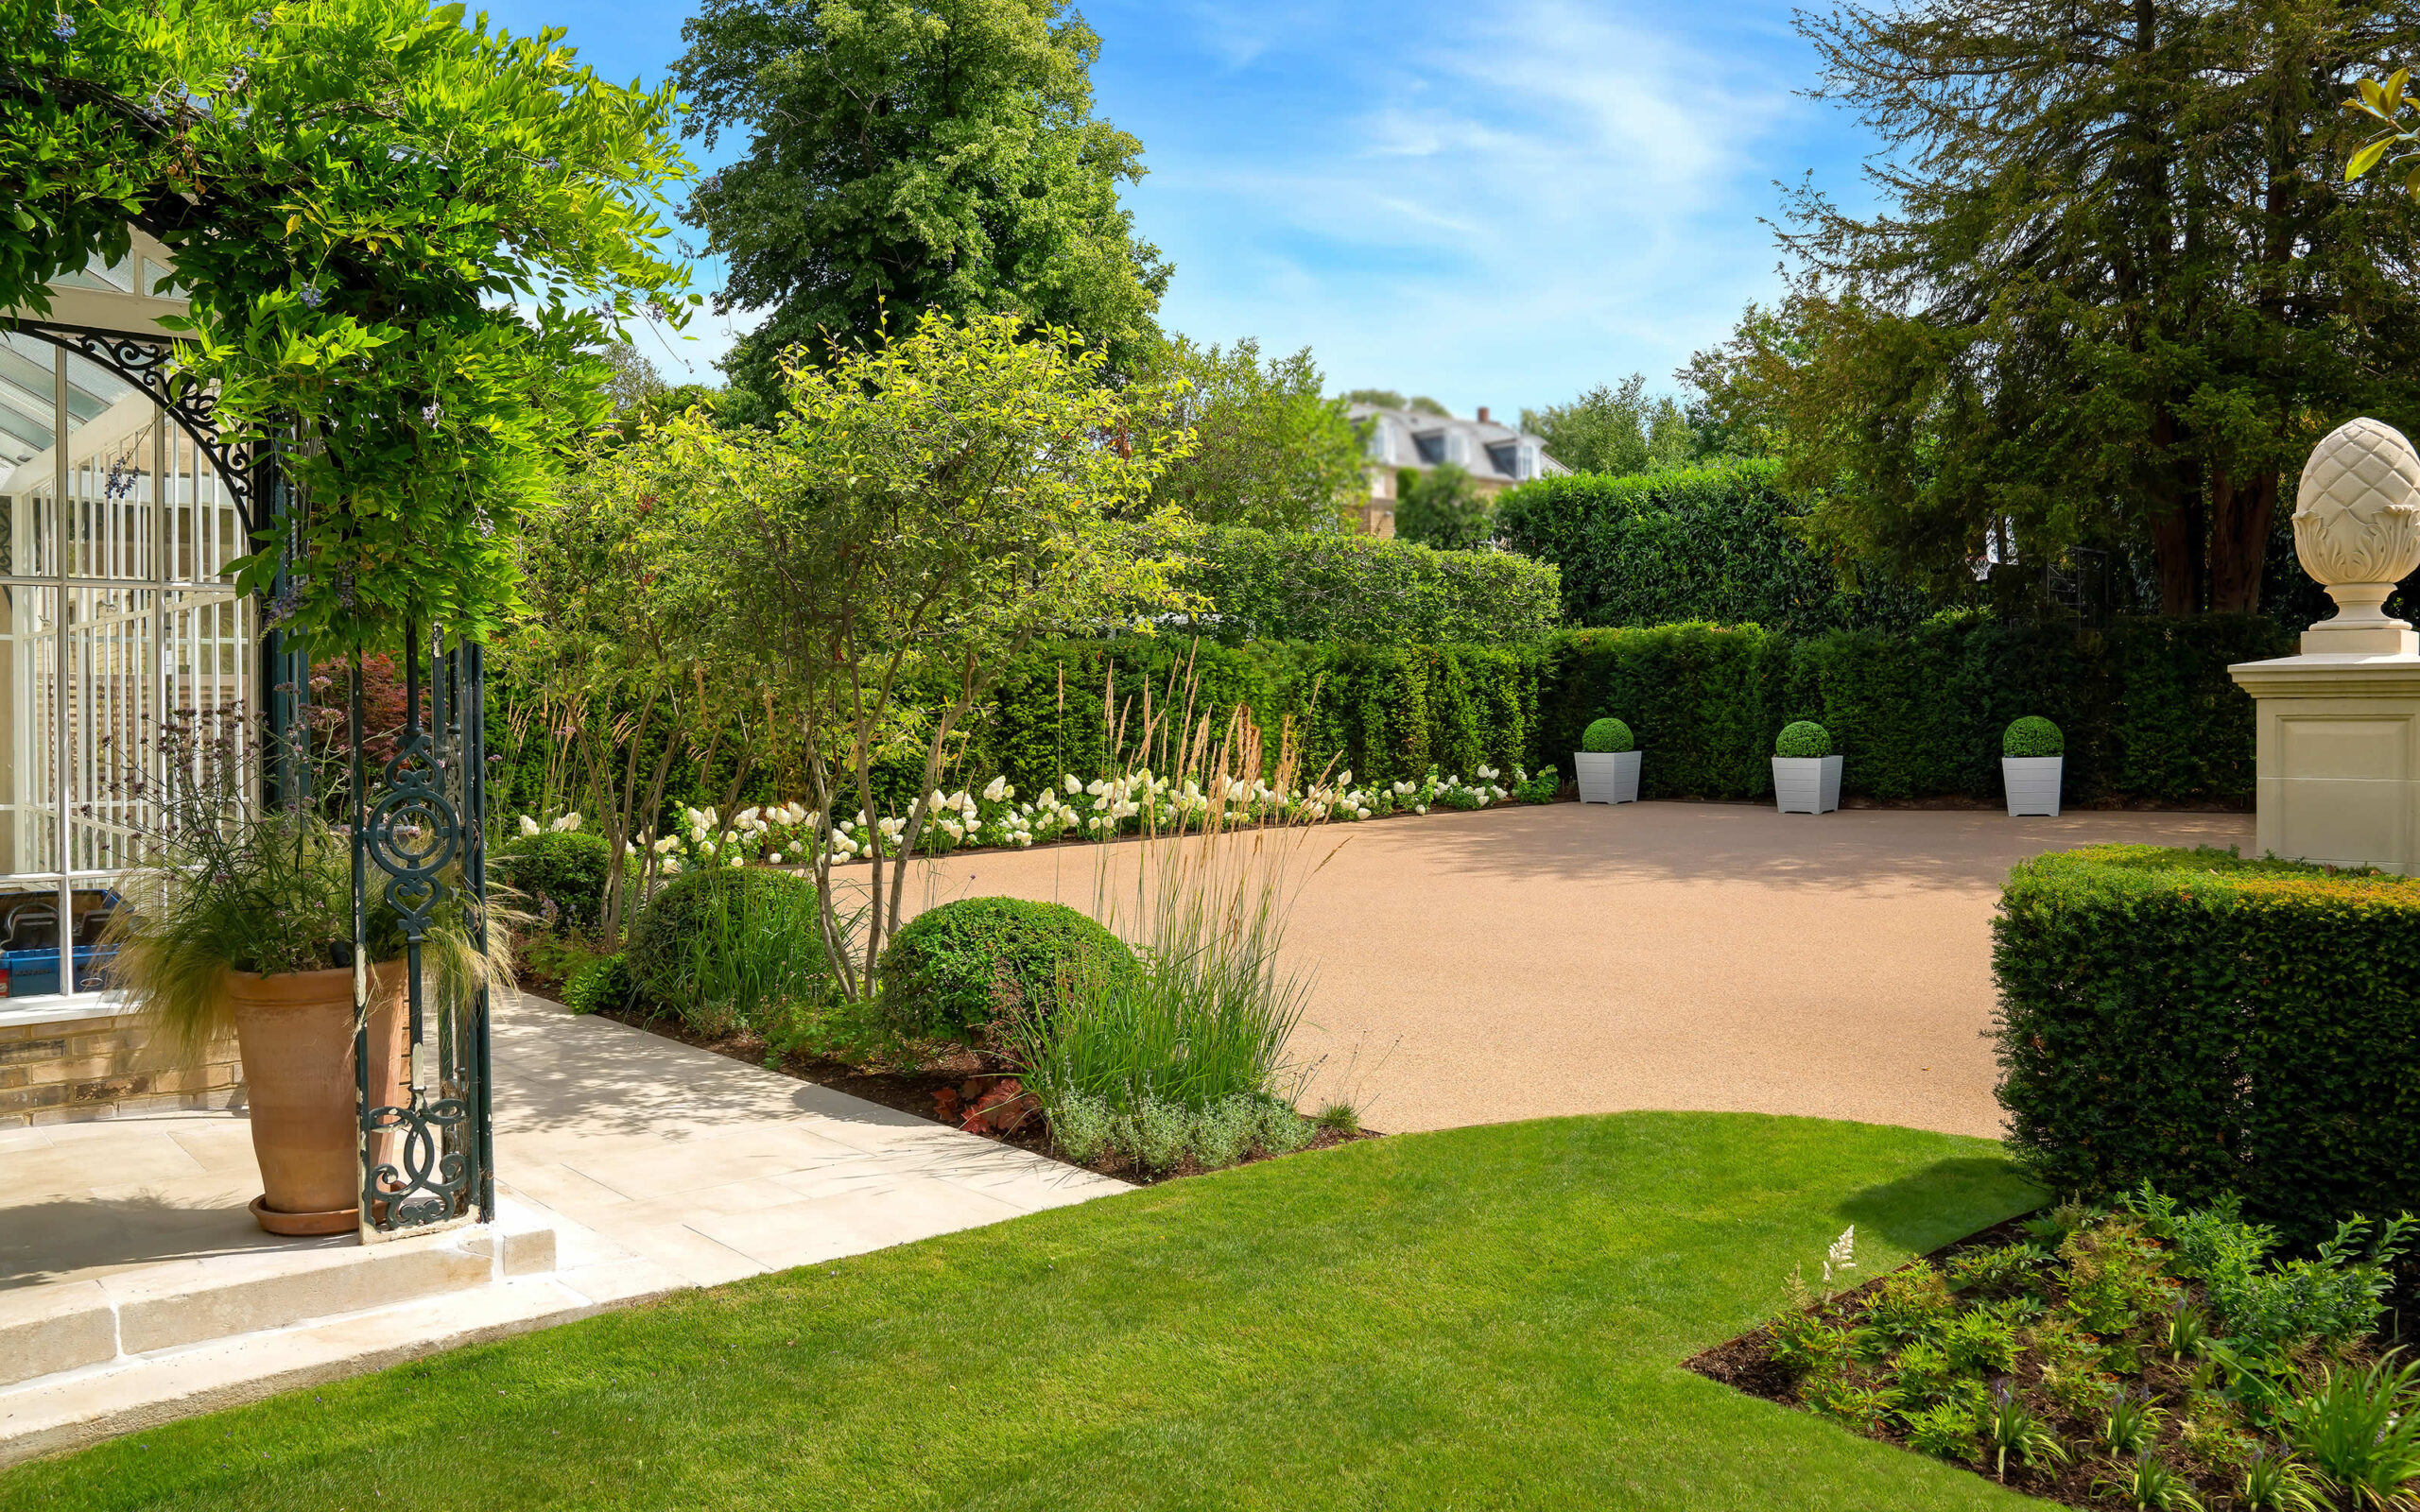 Cobham Surrey contemporary formal driveway country landscaping